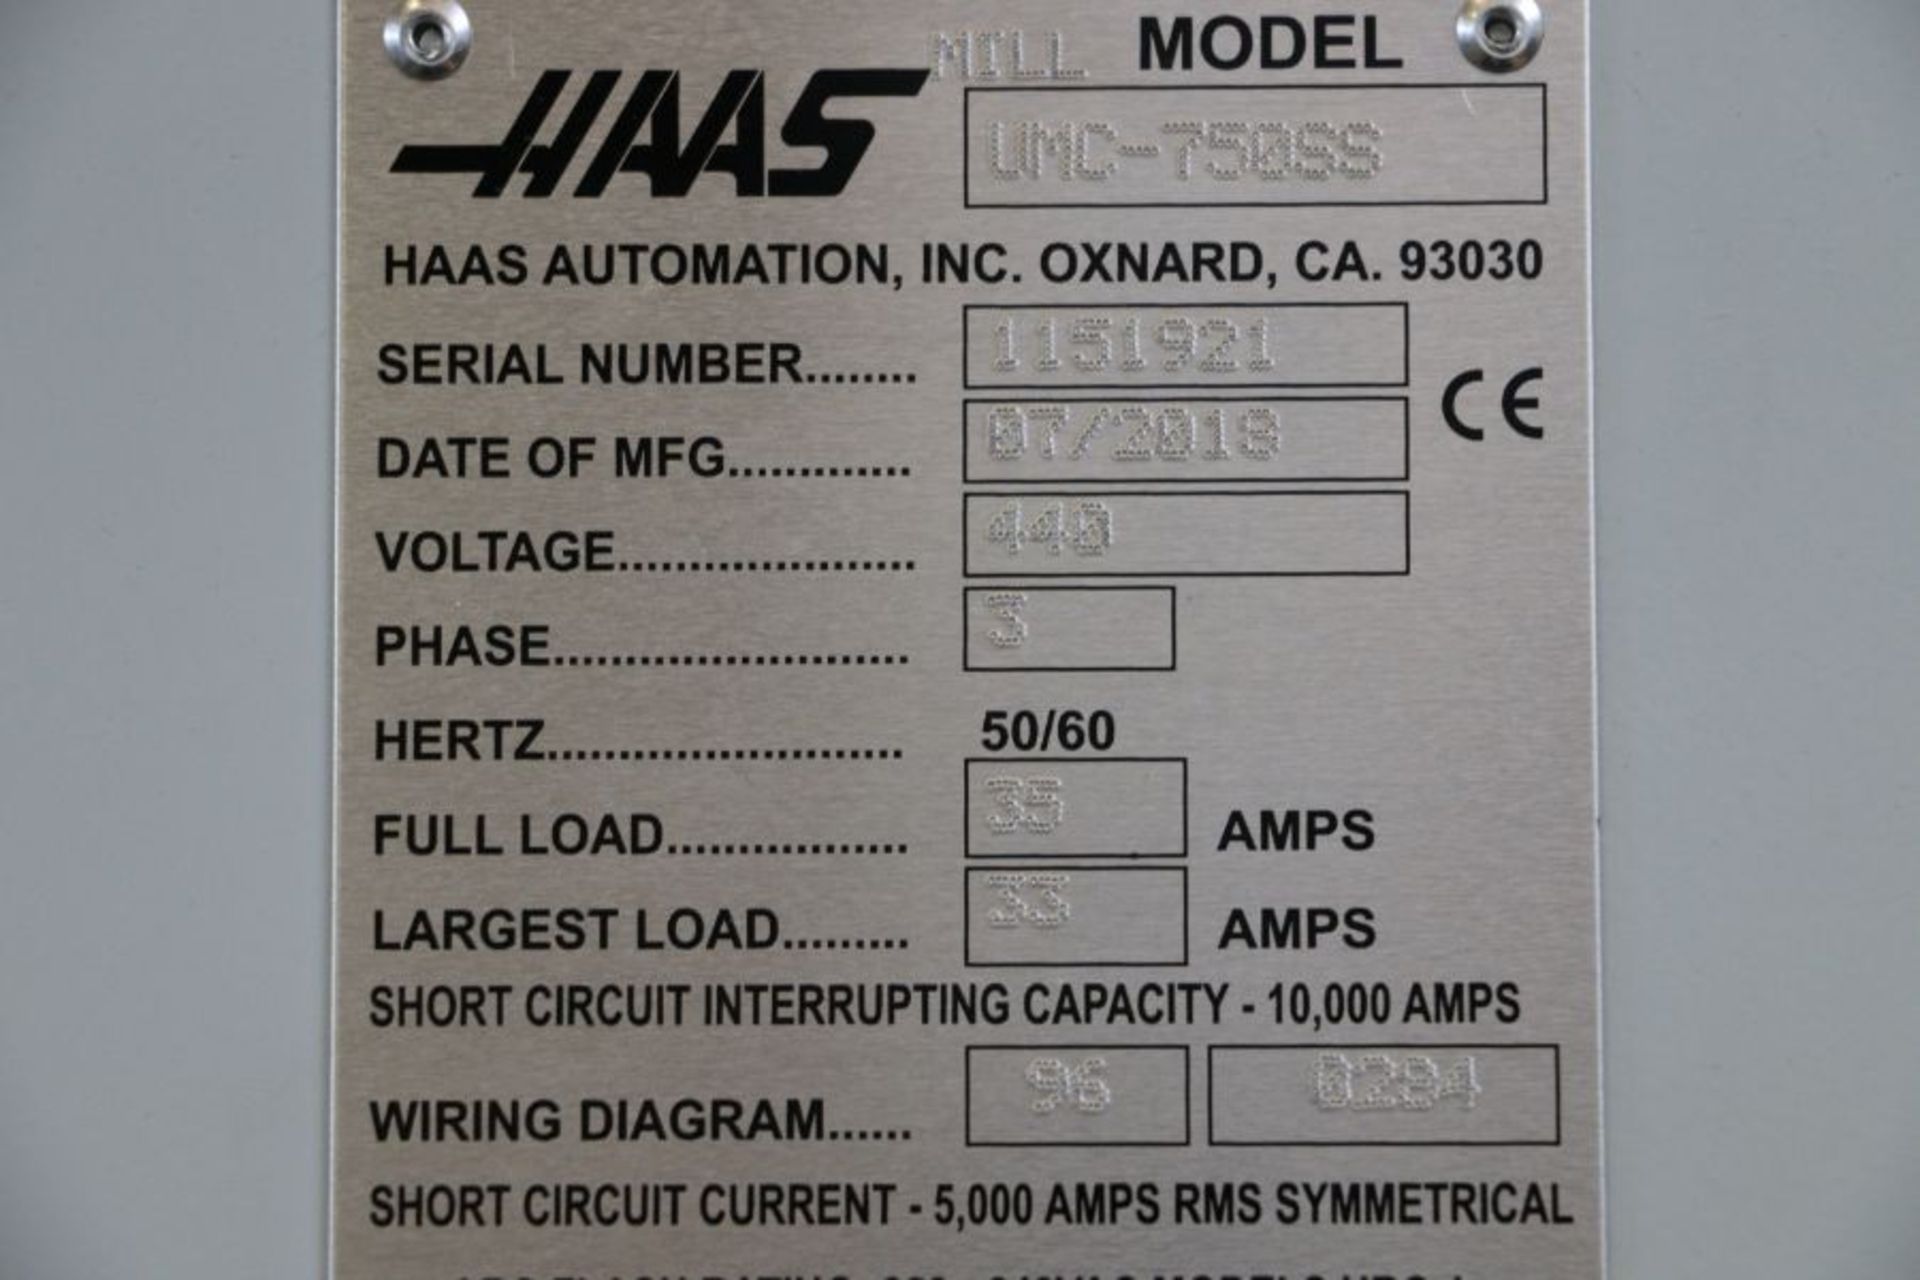 2018, Haas UMC-750SS 5 Axis VMC, round table, 12K RPM, 40 ATC, CT 40, Probe, CC, 1975 Hrs. - Image 15 of 15